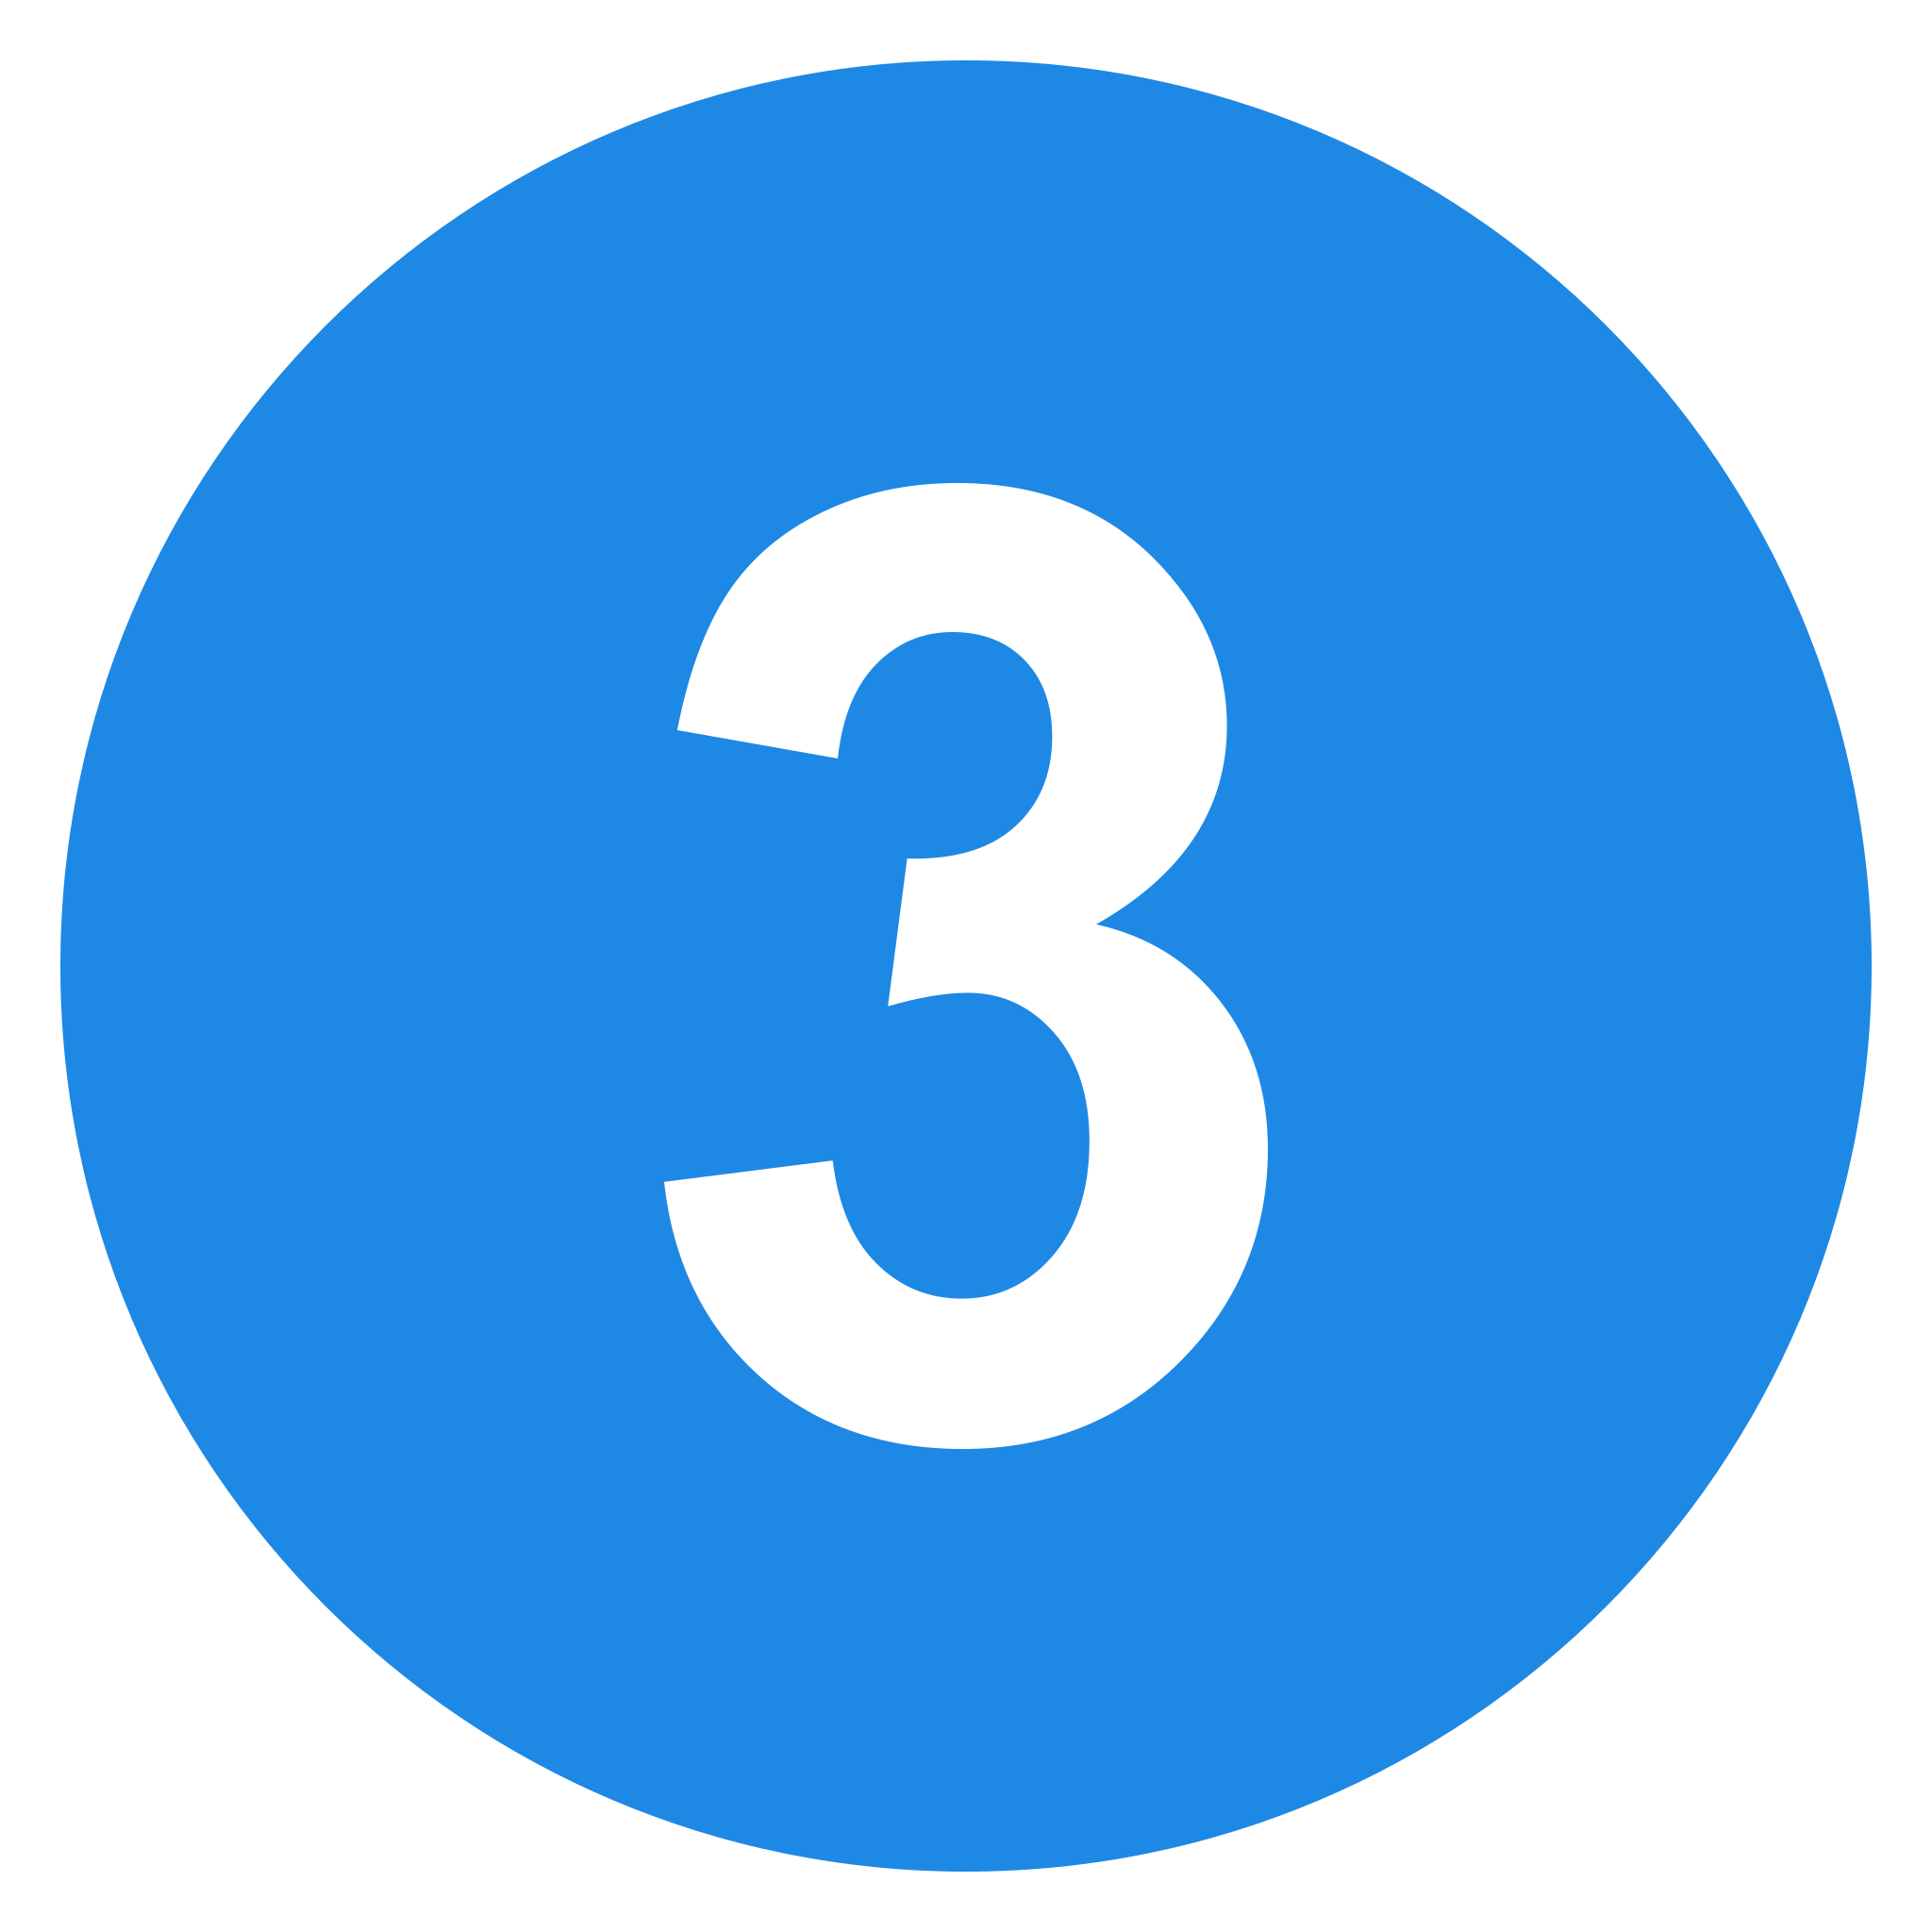 File:Eo circle blue white number-3.svg - Wikimedia Commons